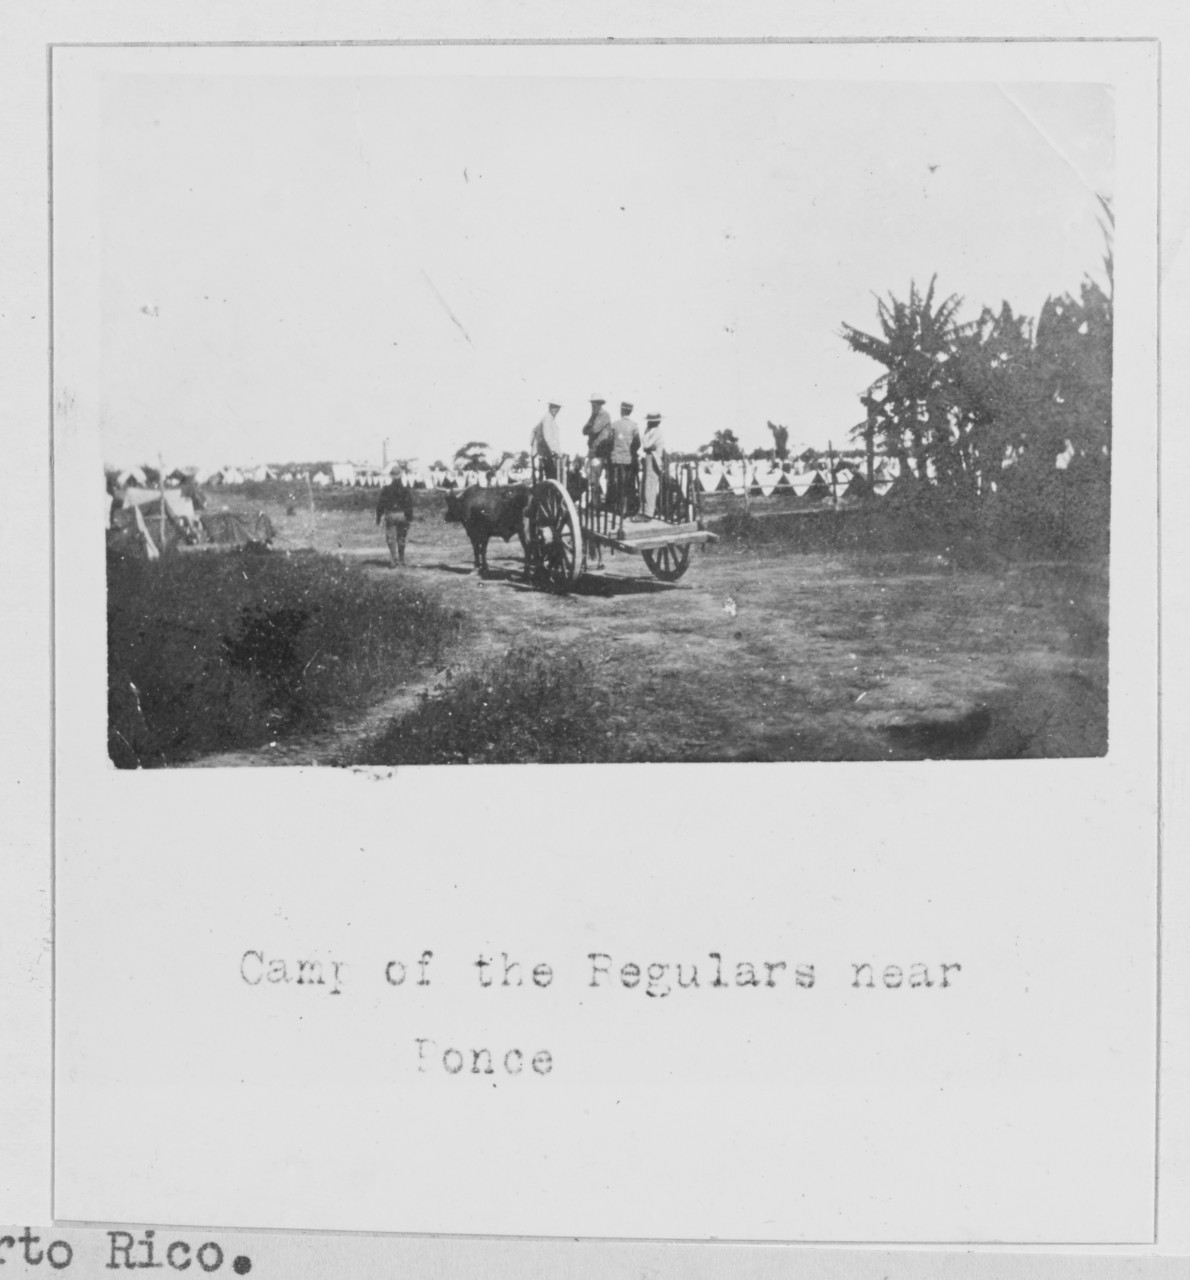 Camp of the regulars near Ponce, P.R